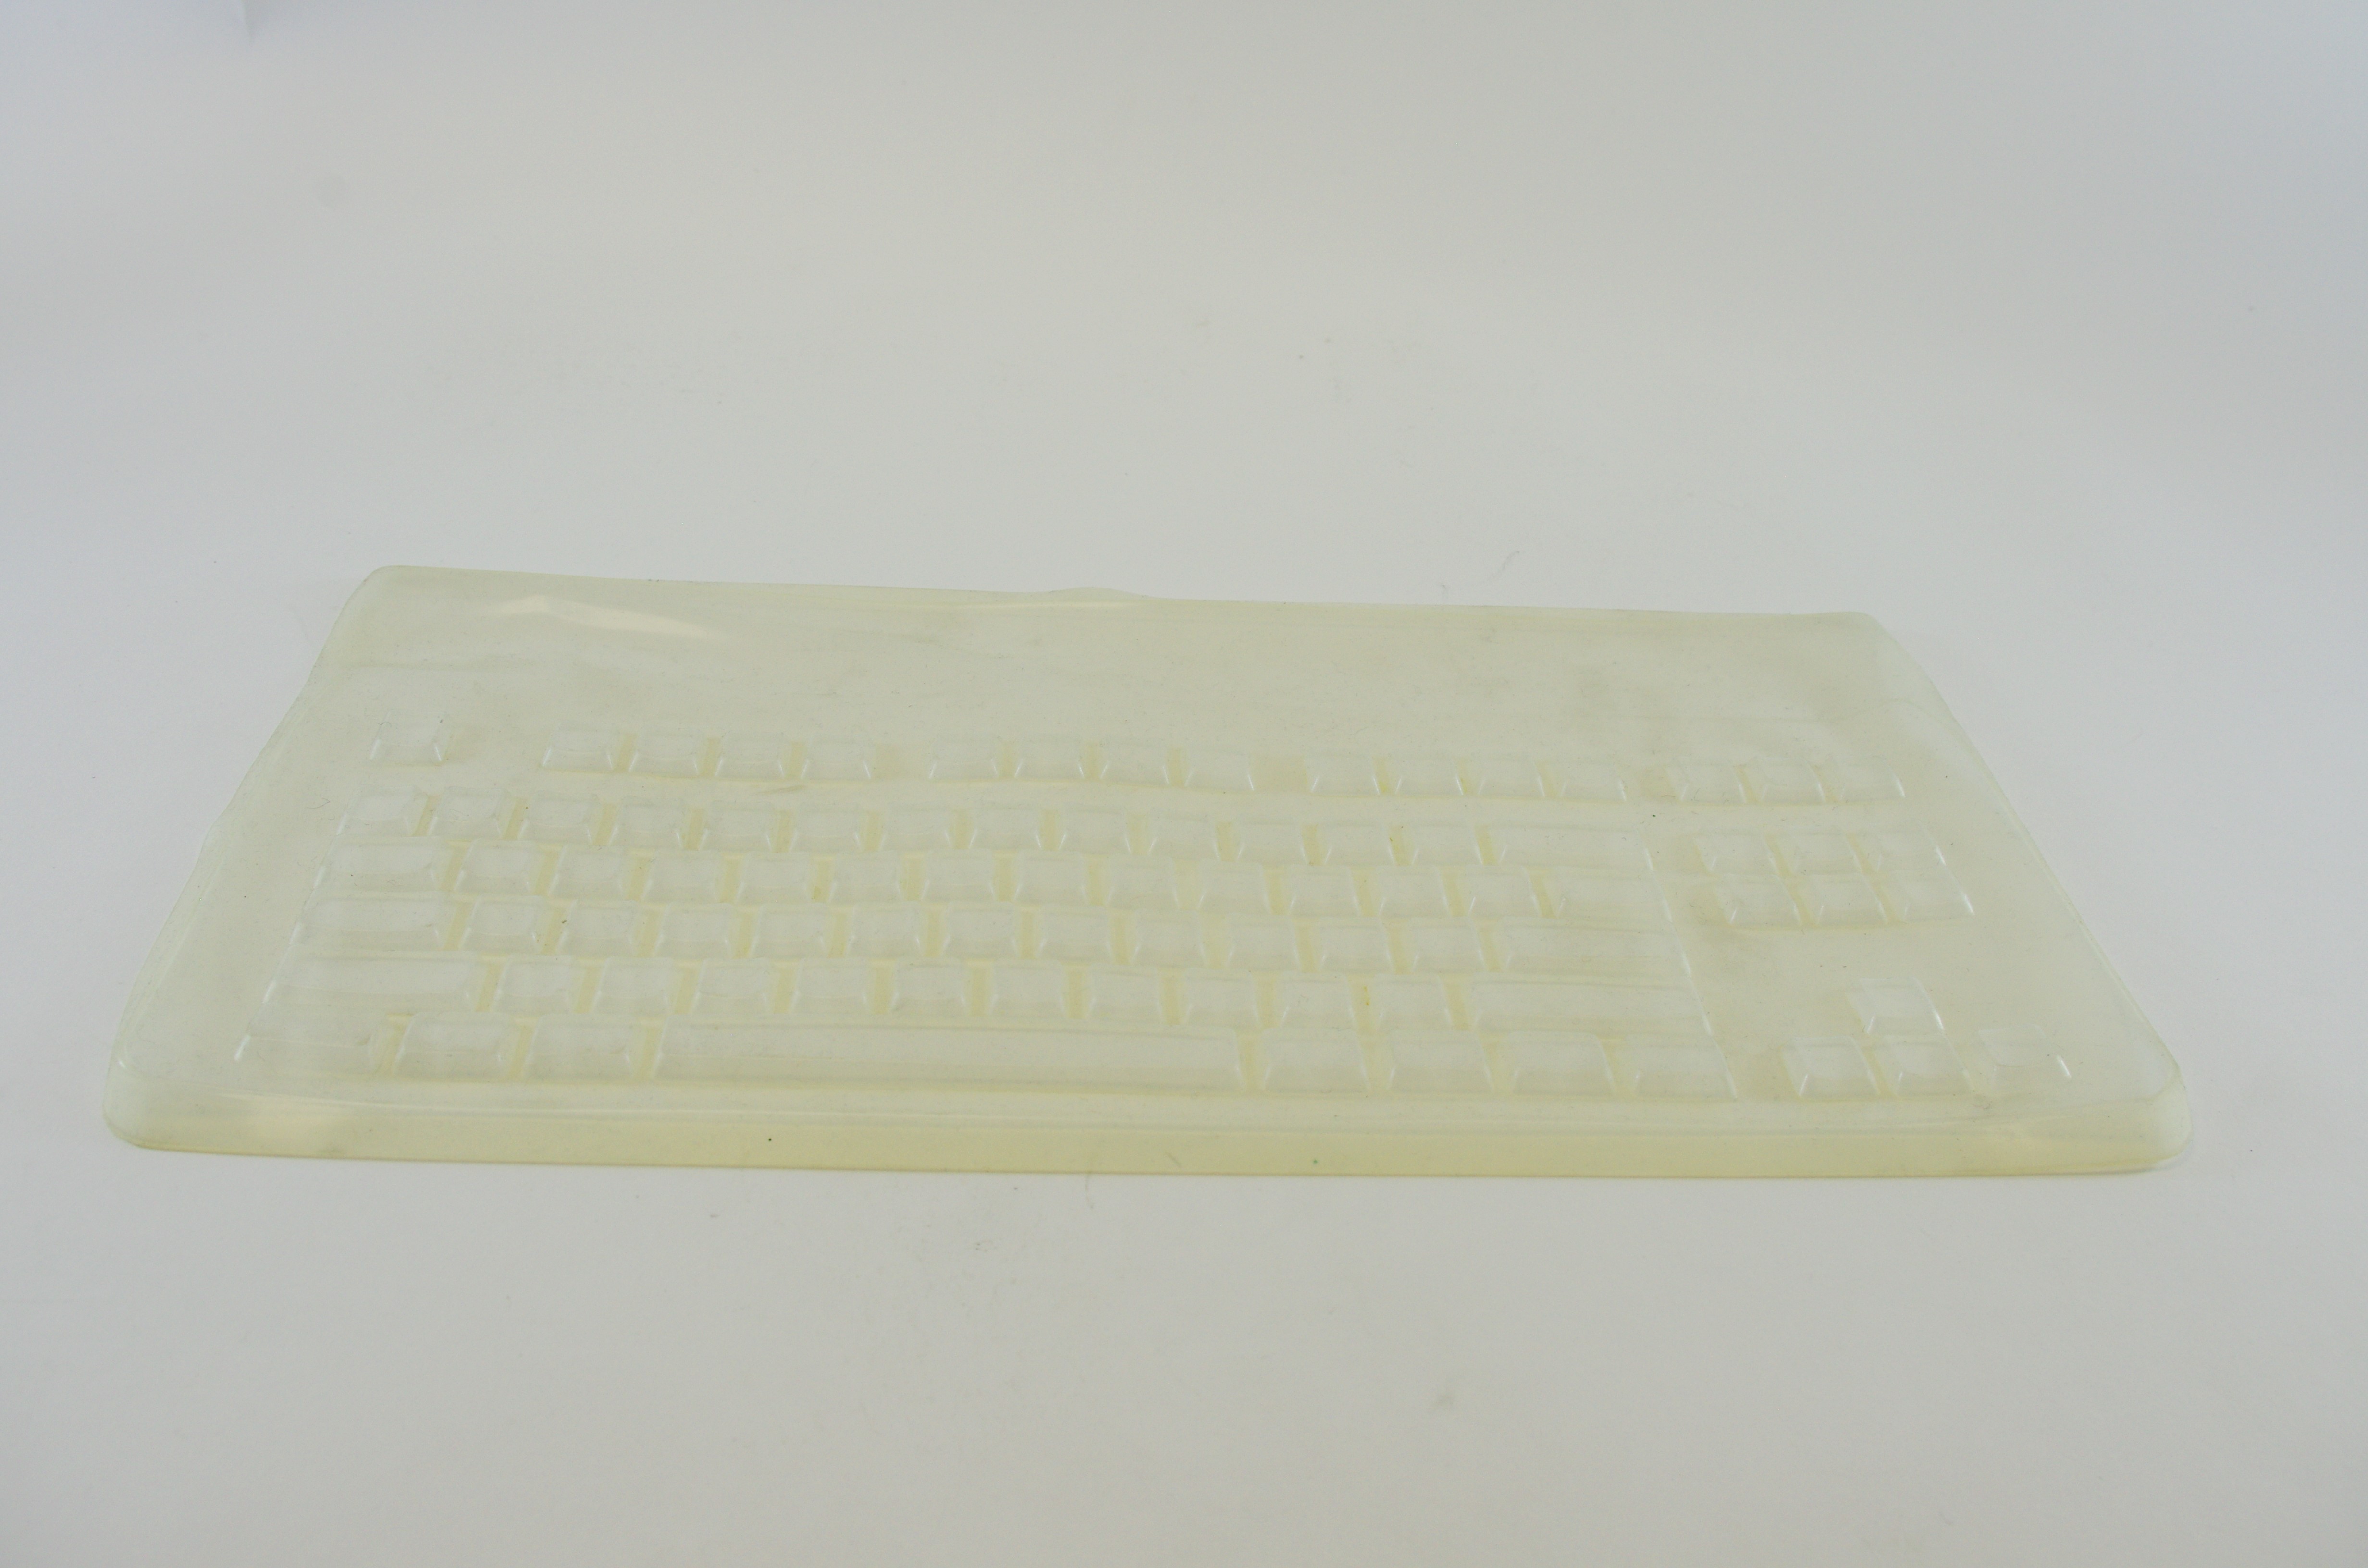 Olympus Keyboard Cover -  For MAJ-845 Keyboard (EVIS EXERA 160 System)